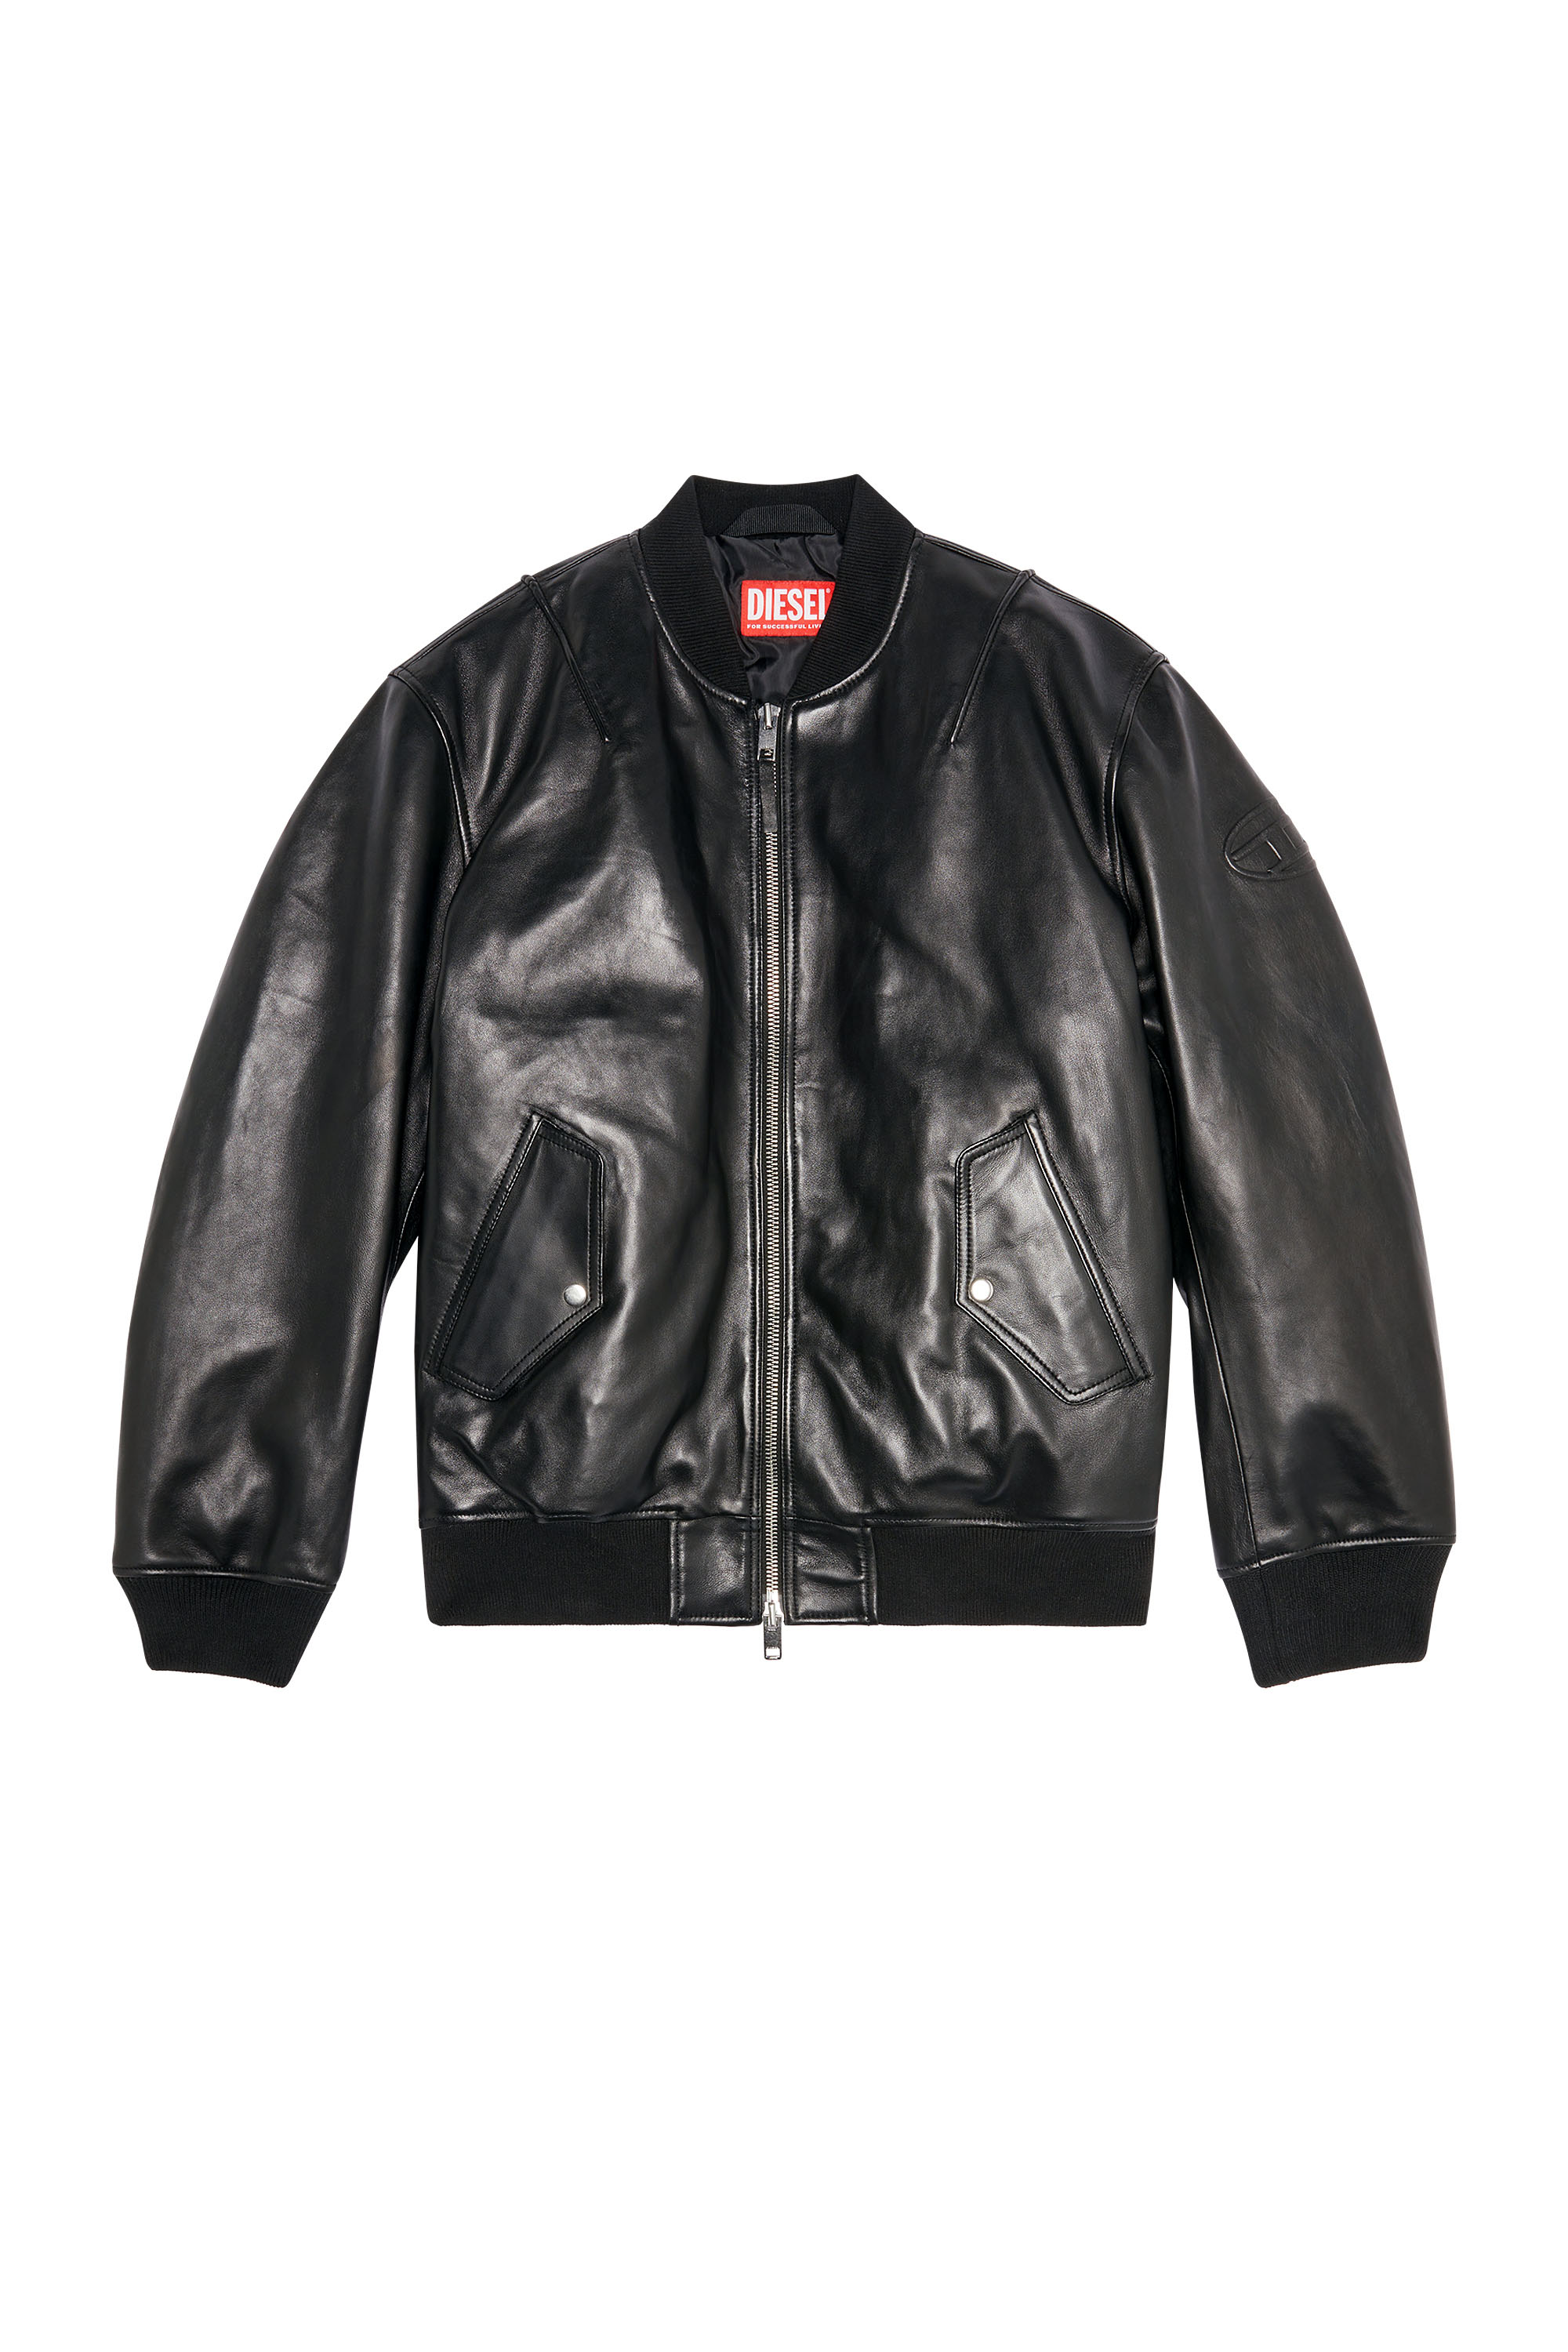 Diesel - L-PRITTS, Man Padded jacket in tumbled leather in Black - Image 3